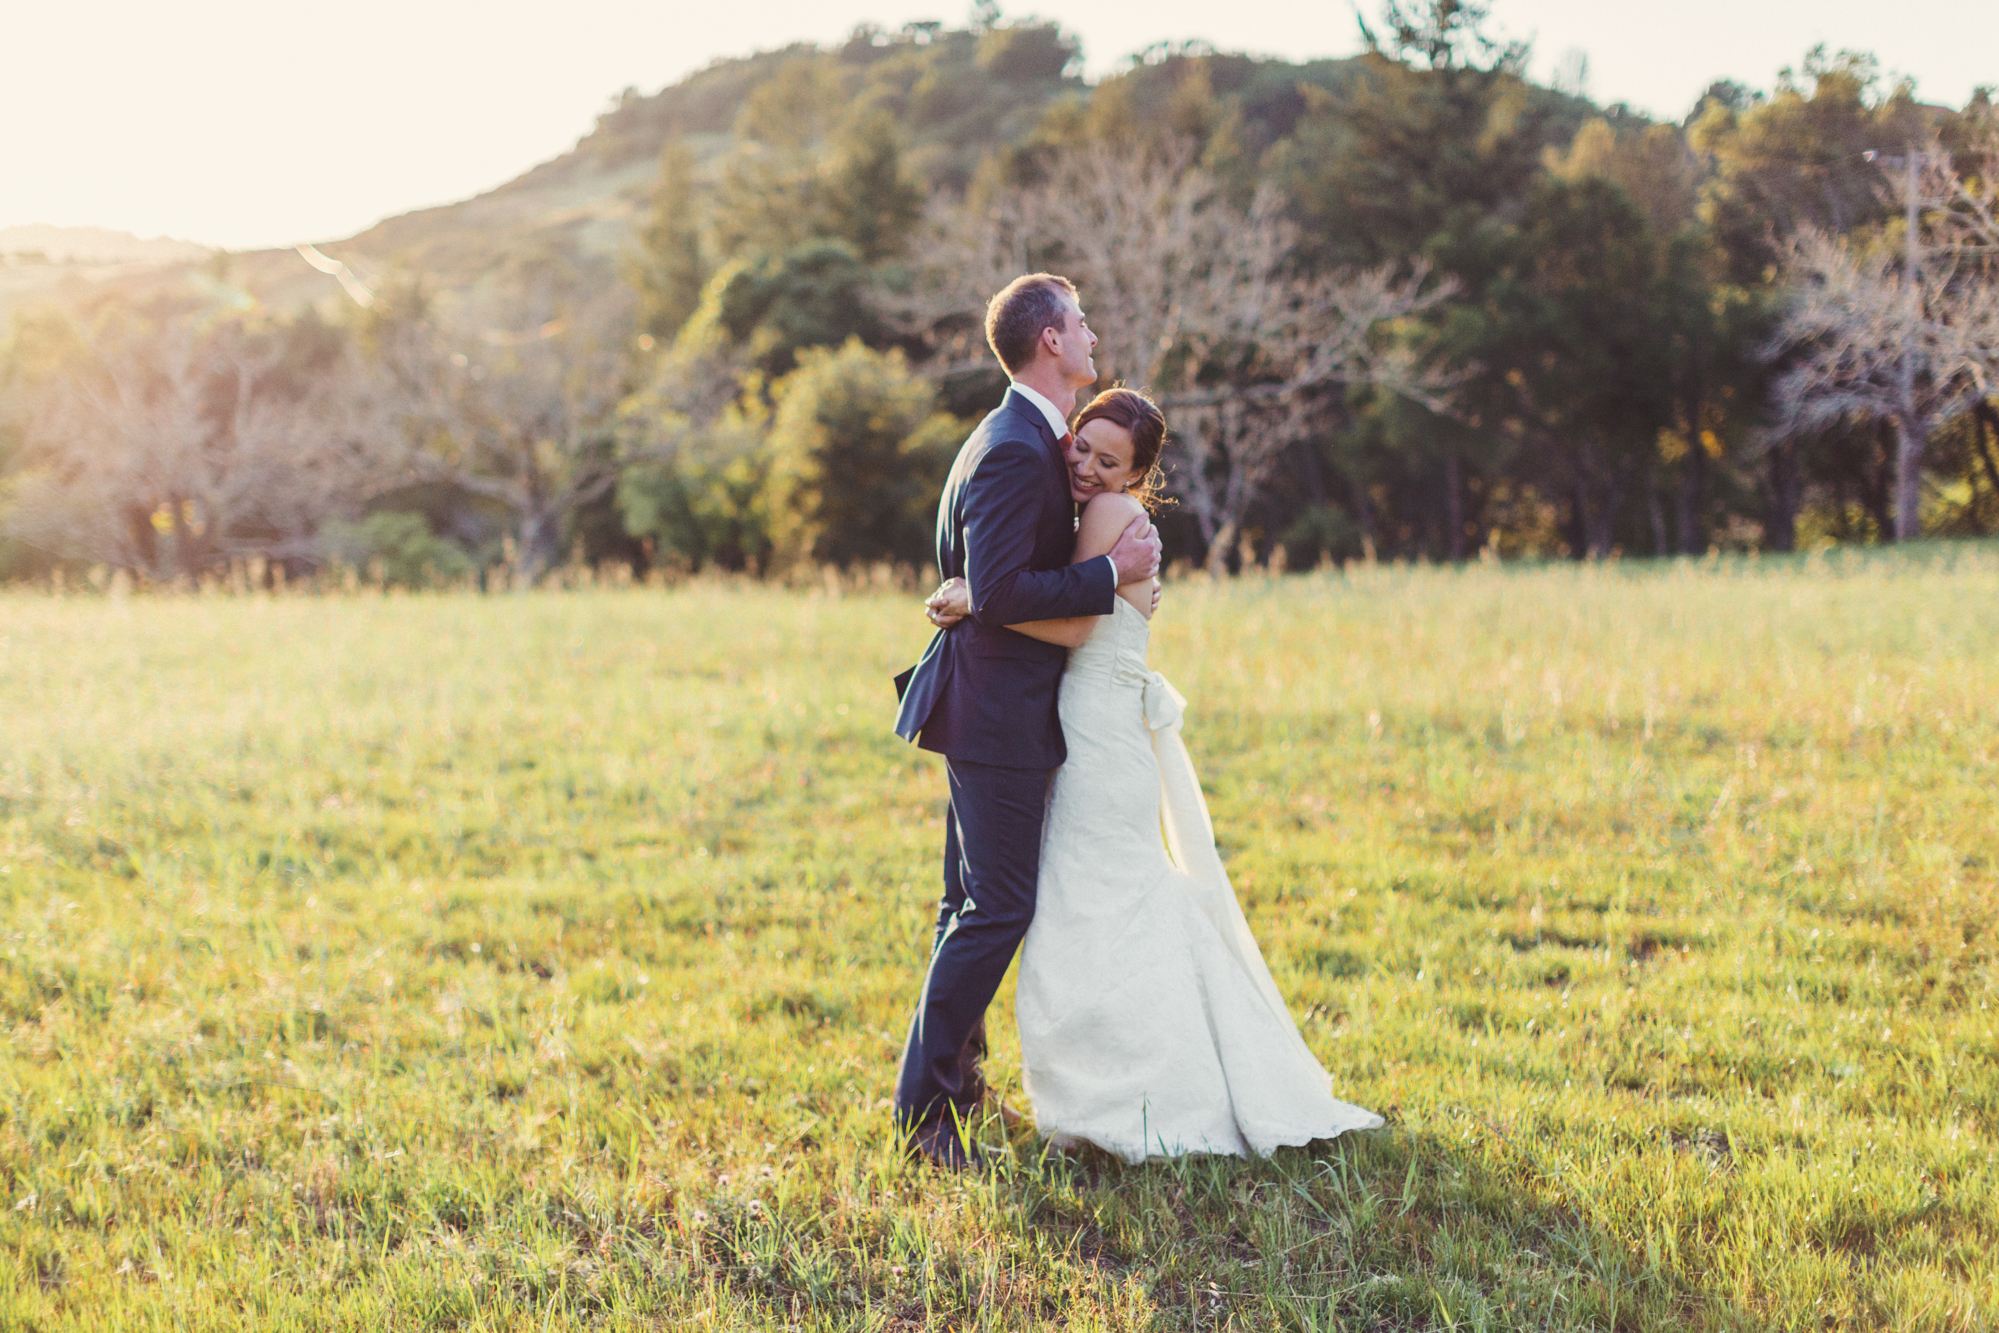 Triple S Ranch Wedding in Napa Valley @Anne-Claire Brun 0104